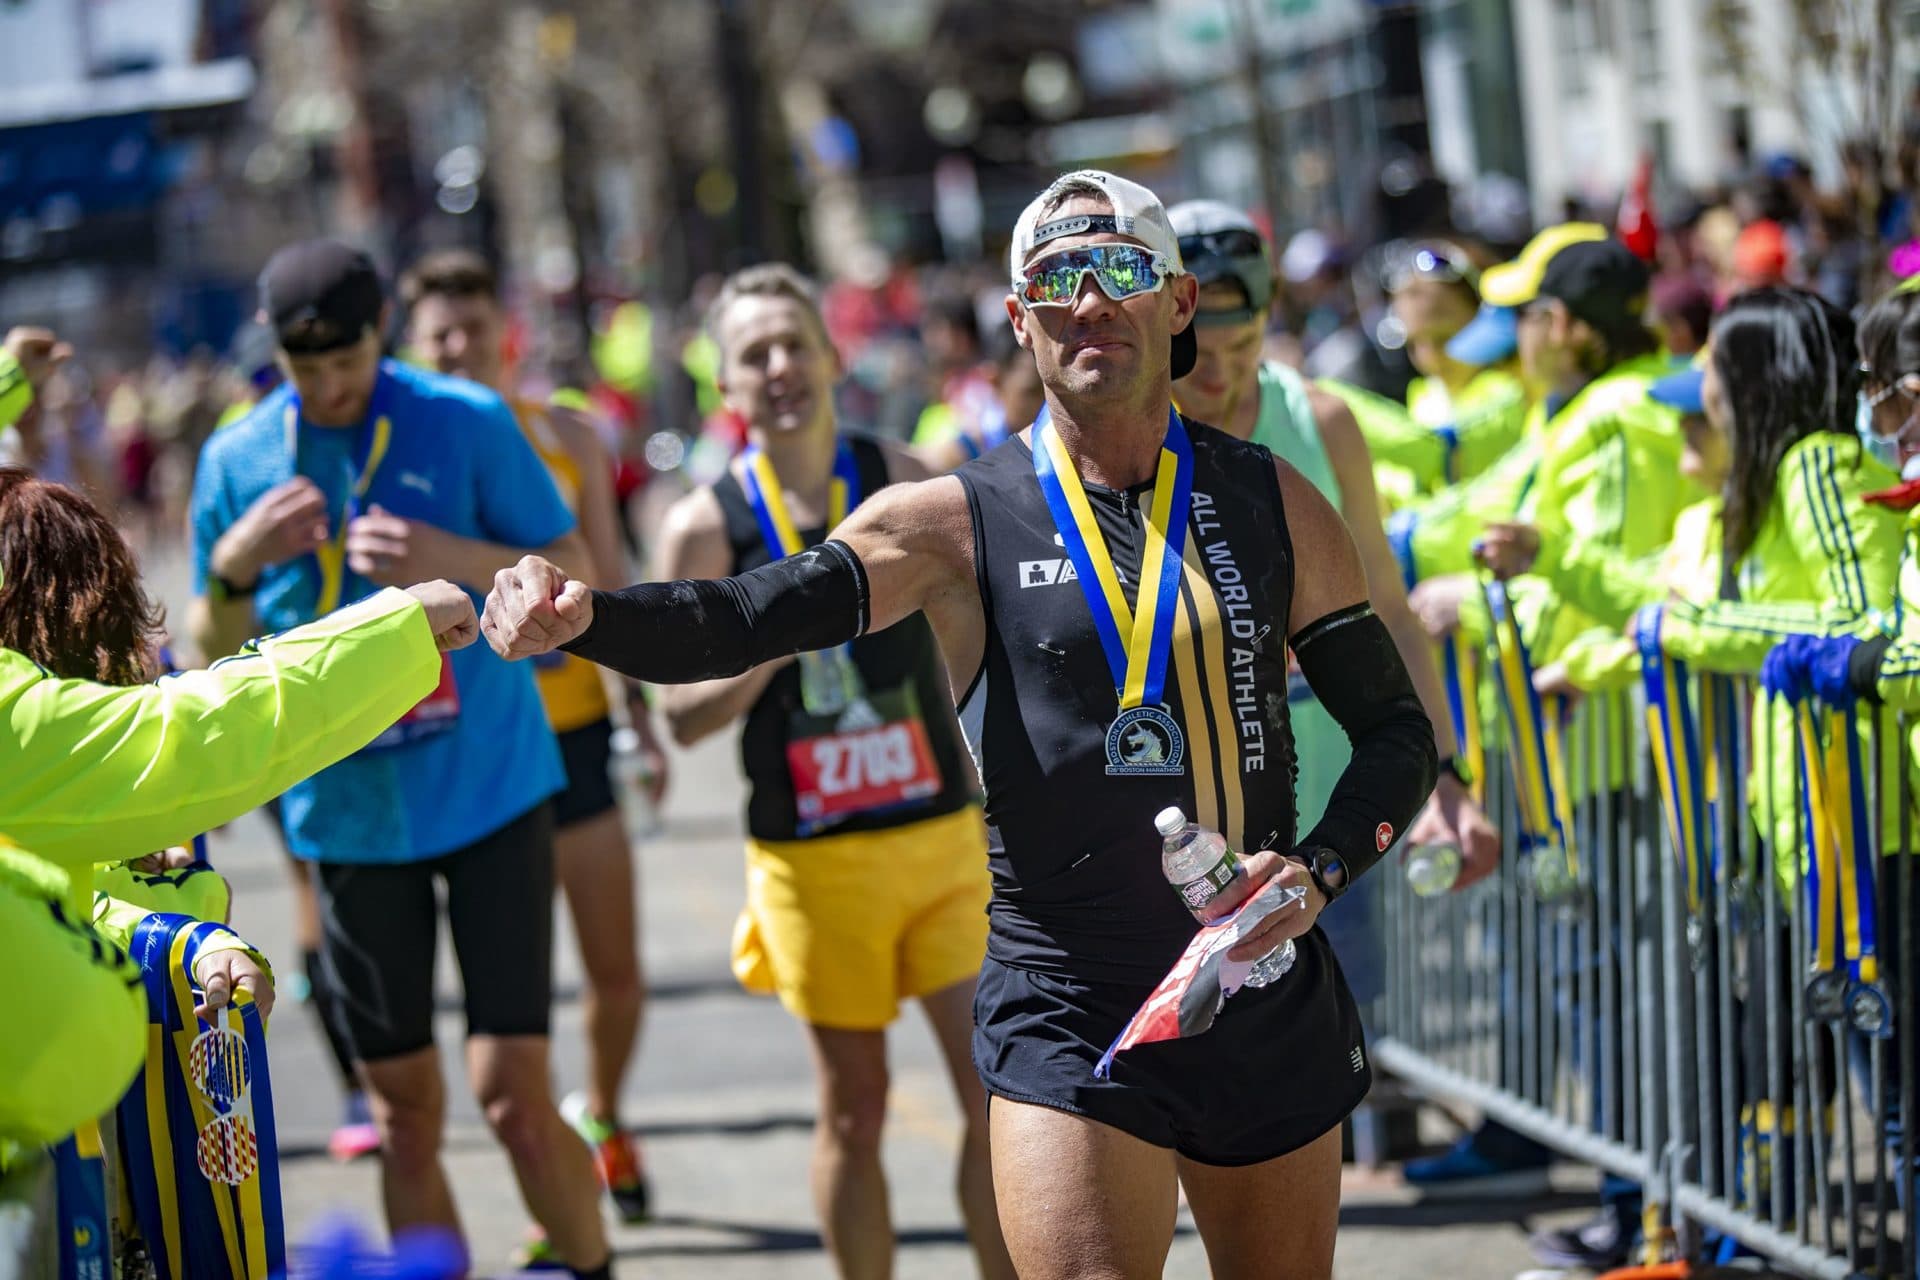 Kenneth Jones gets a fist bump from a Boston Marathon volunteer after he finished the race. (Jesse Costa/WBUR)